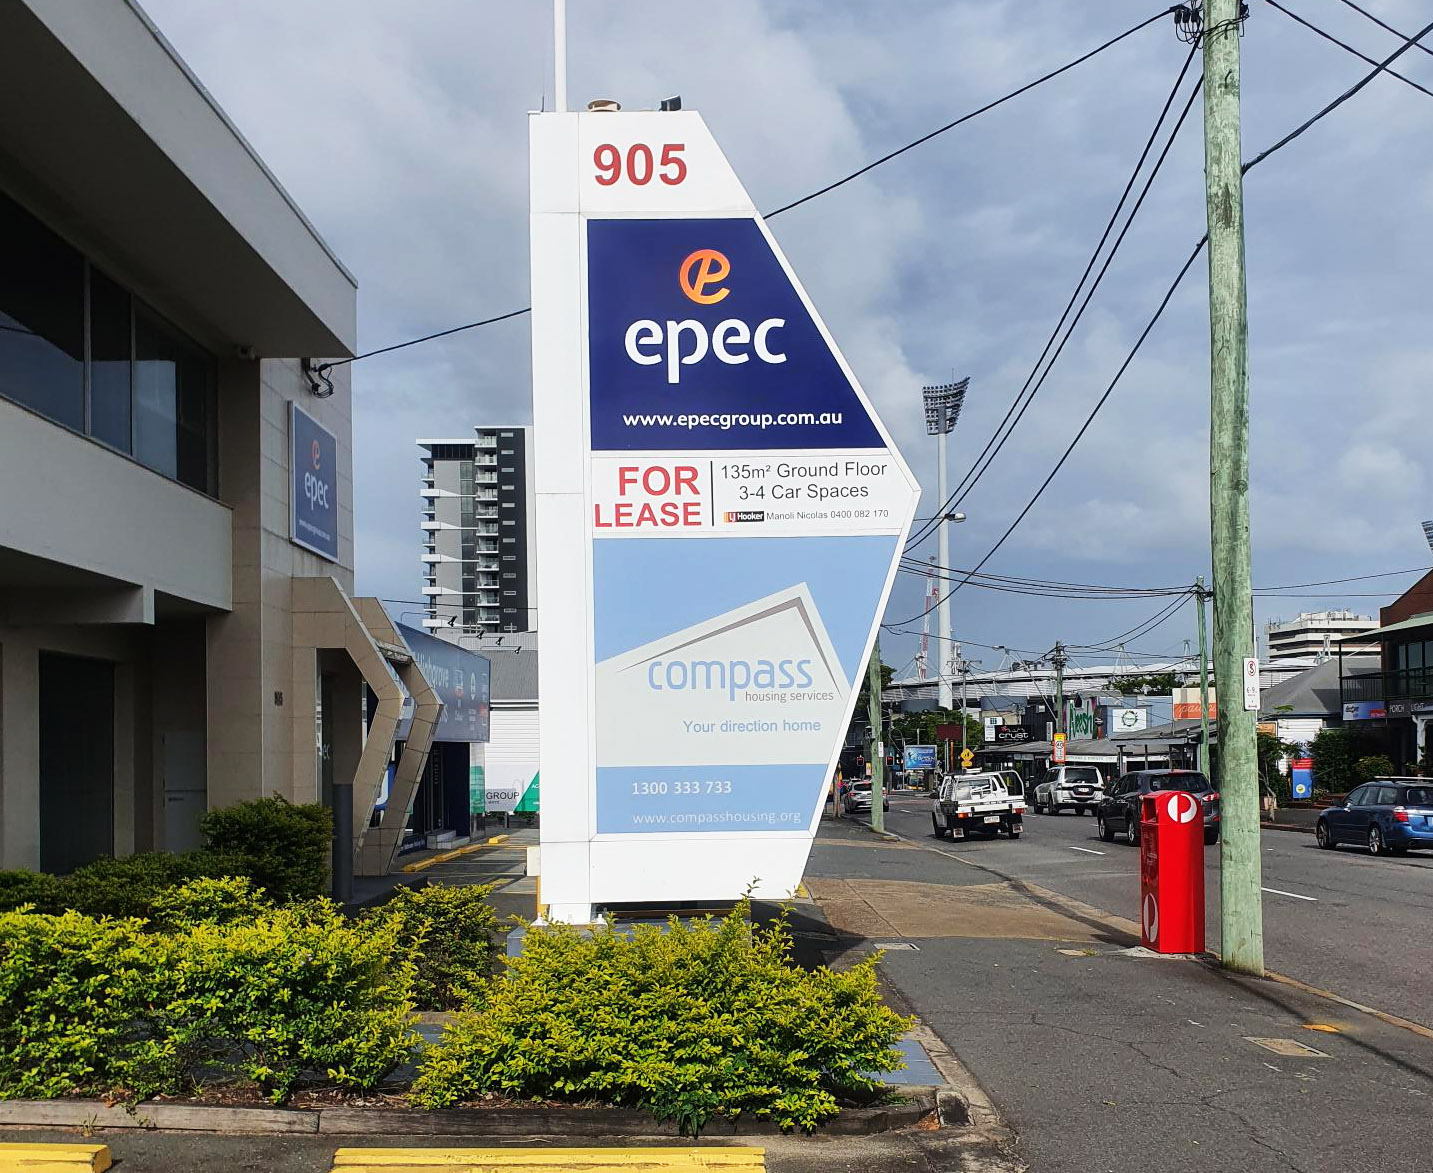 A photo of the front of a building with a large pylon sign in front of the building, next to the sidewalk. Part of the sign pylon is a dark blue background with a white and orange logo that says EPEC.